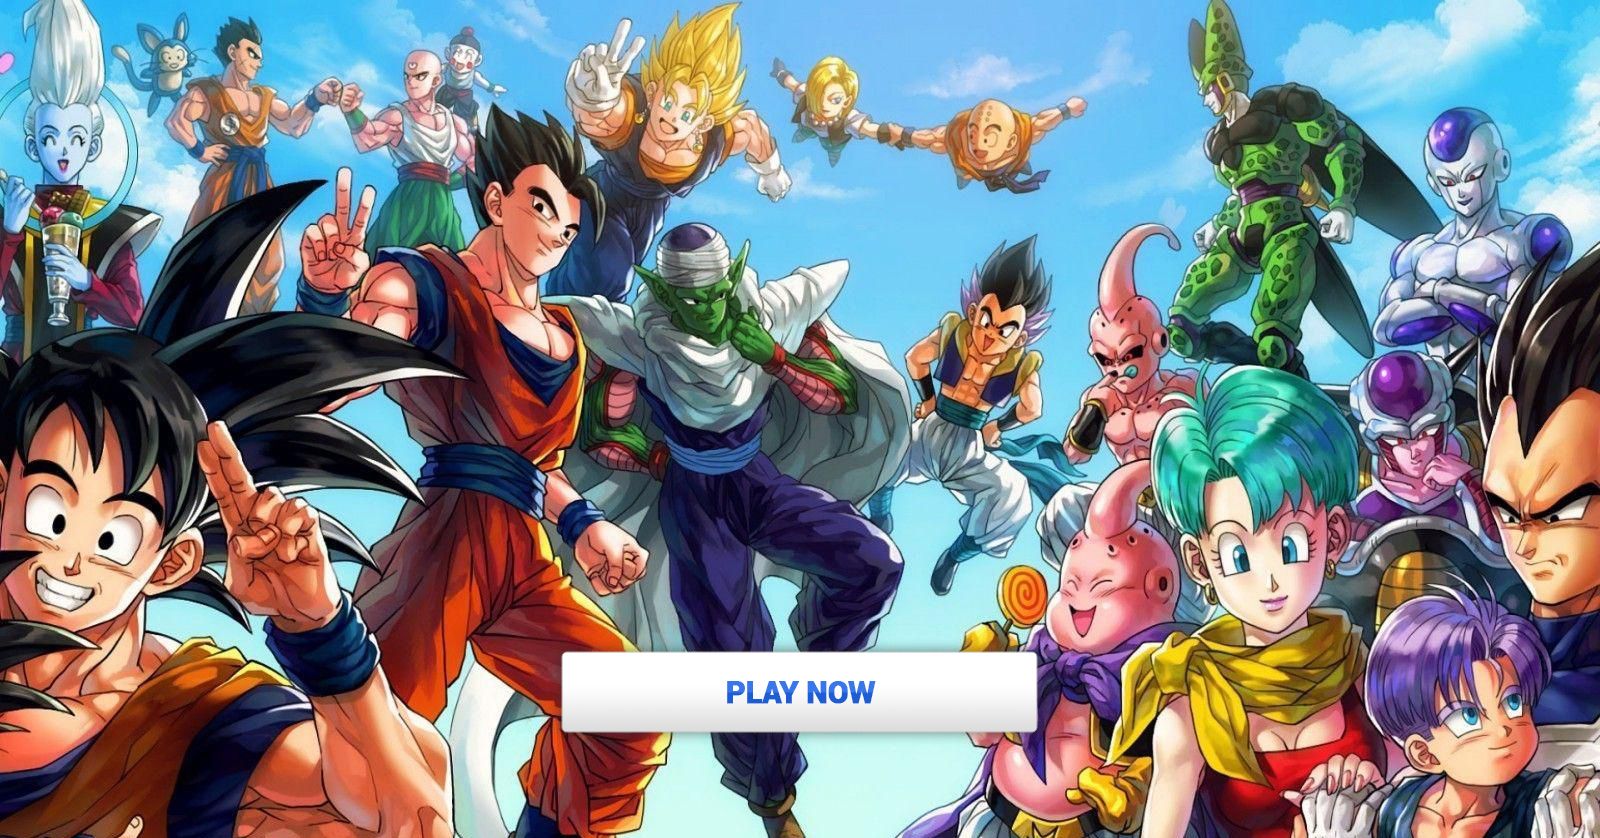 Which Dragon Ball Z Character Are You? Take The Test And We'll Tell You!